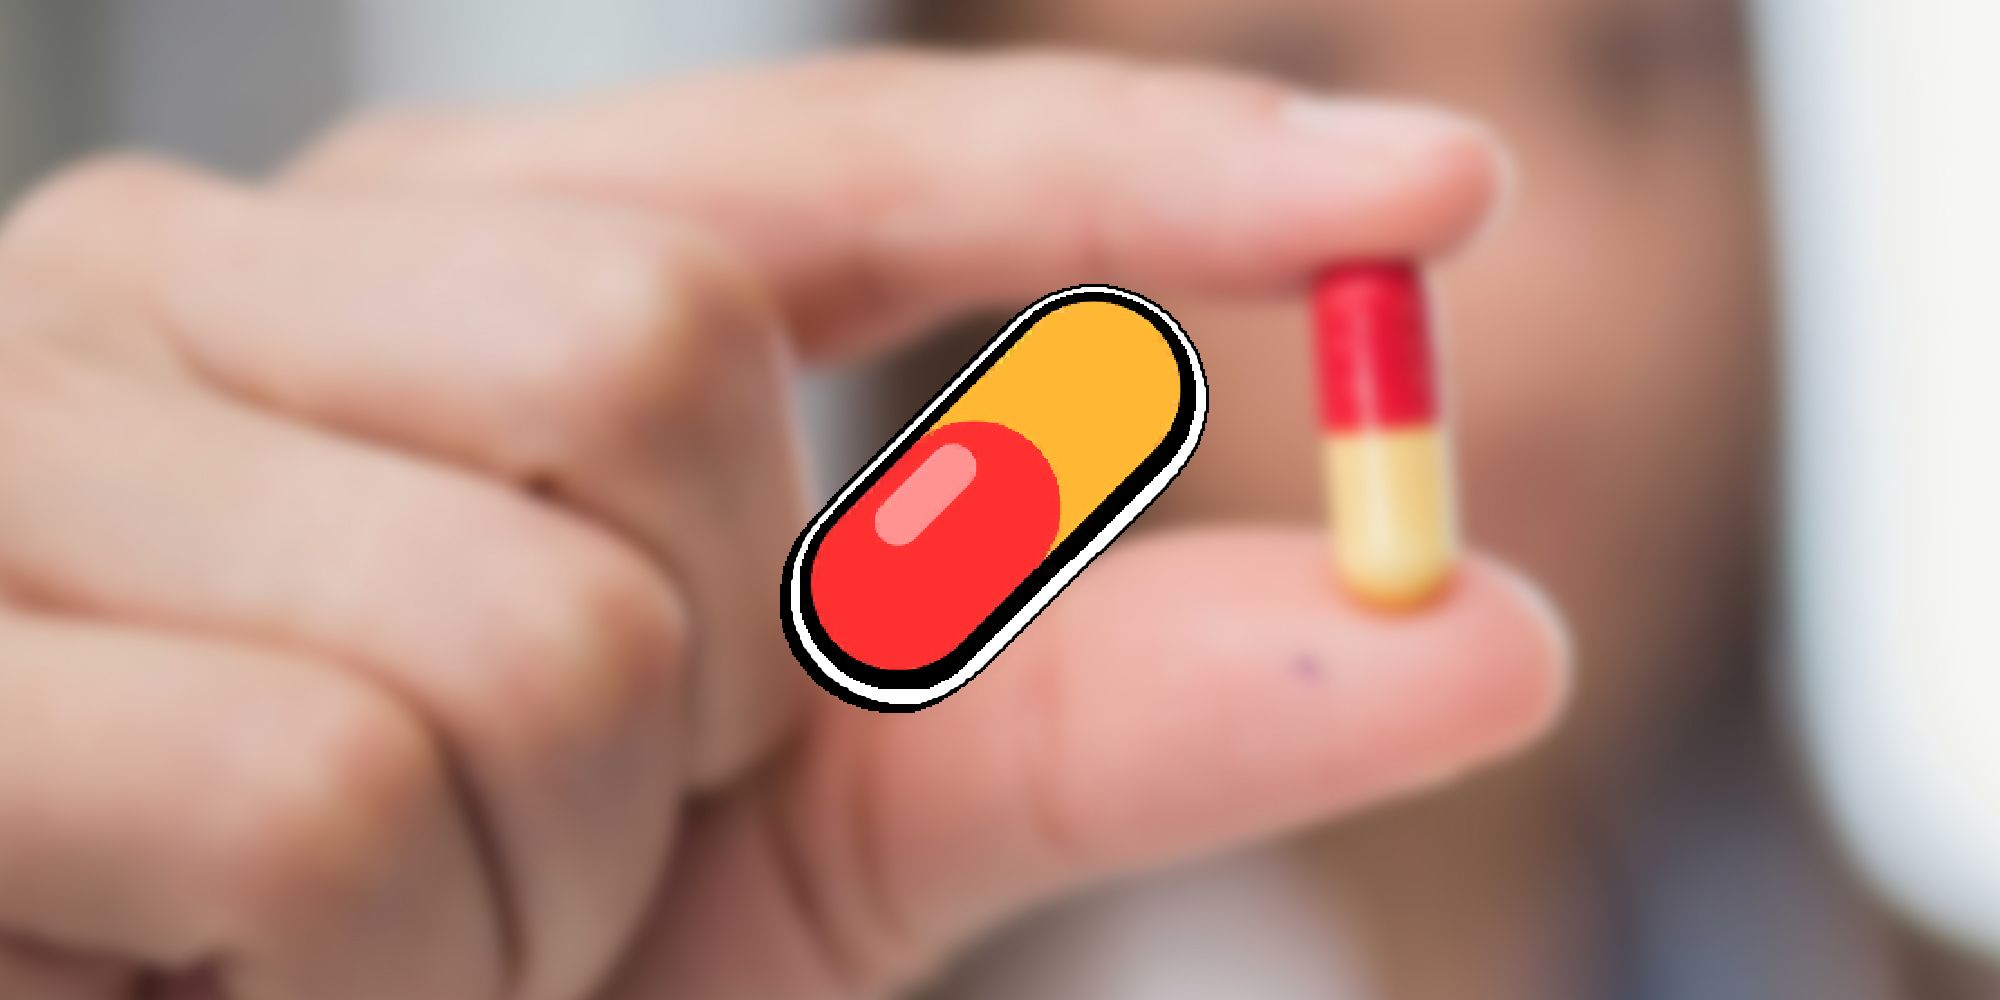 Super Auto Pets - In-Game Sleeping Pill Item Overlaid On Image Of Woman Holding Up A Pill To Camera